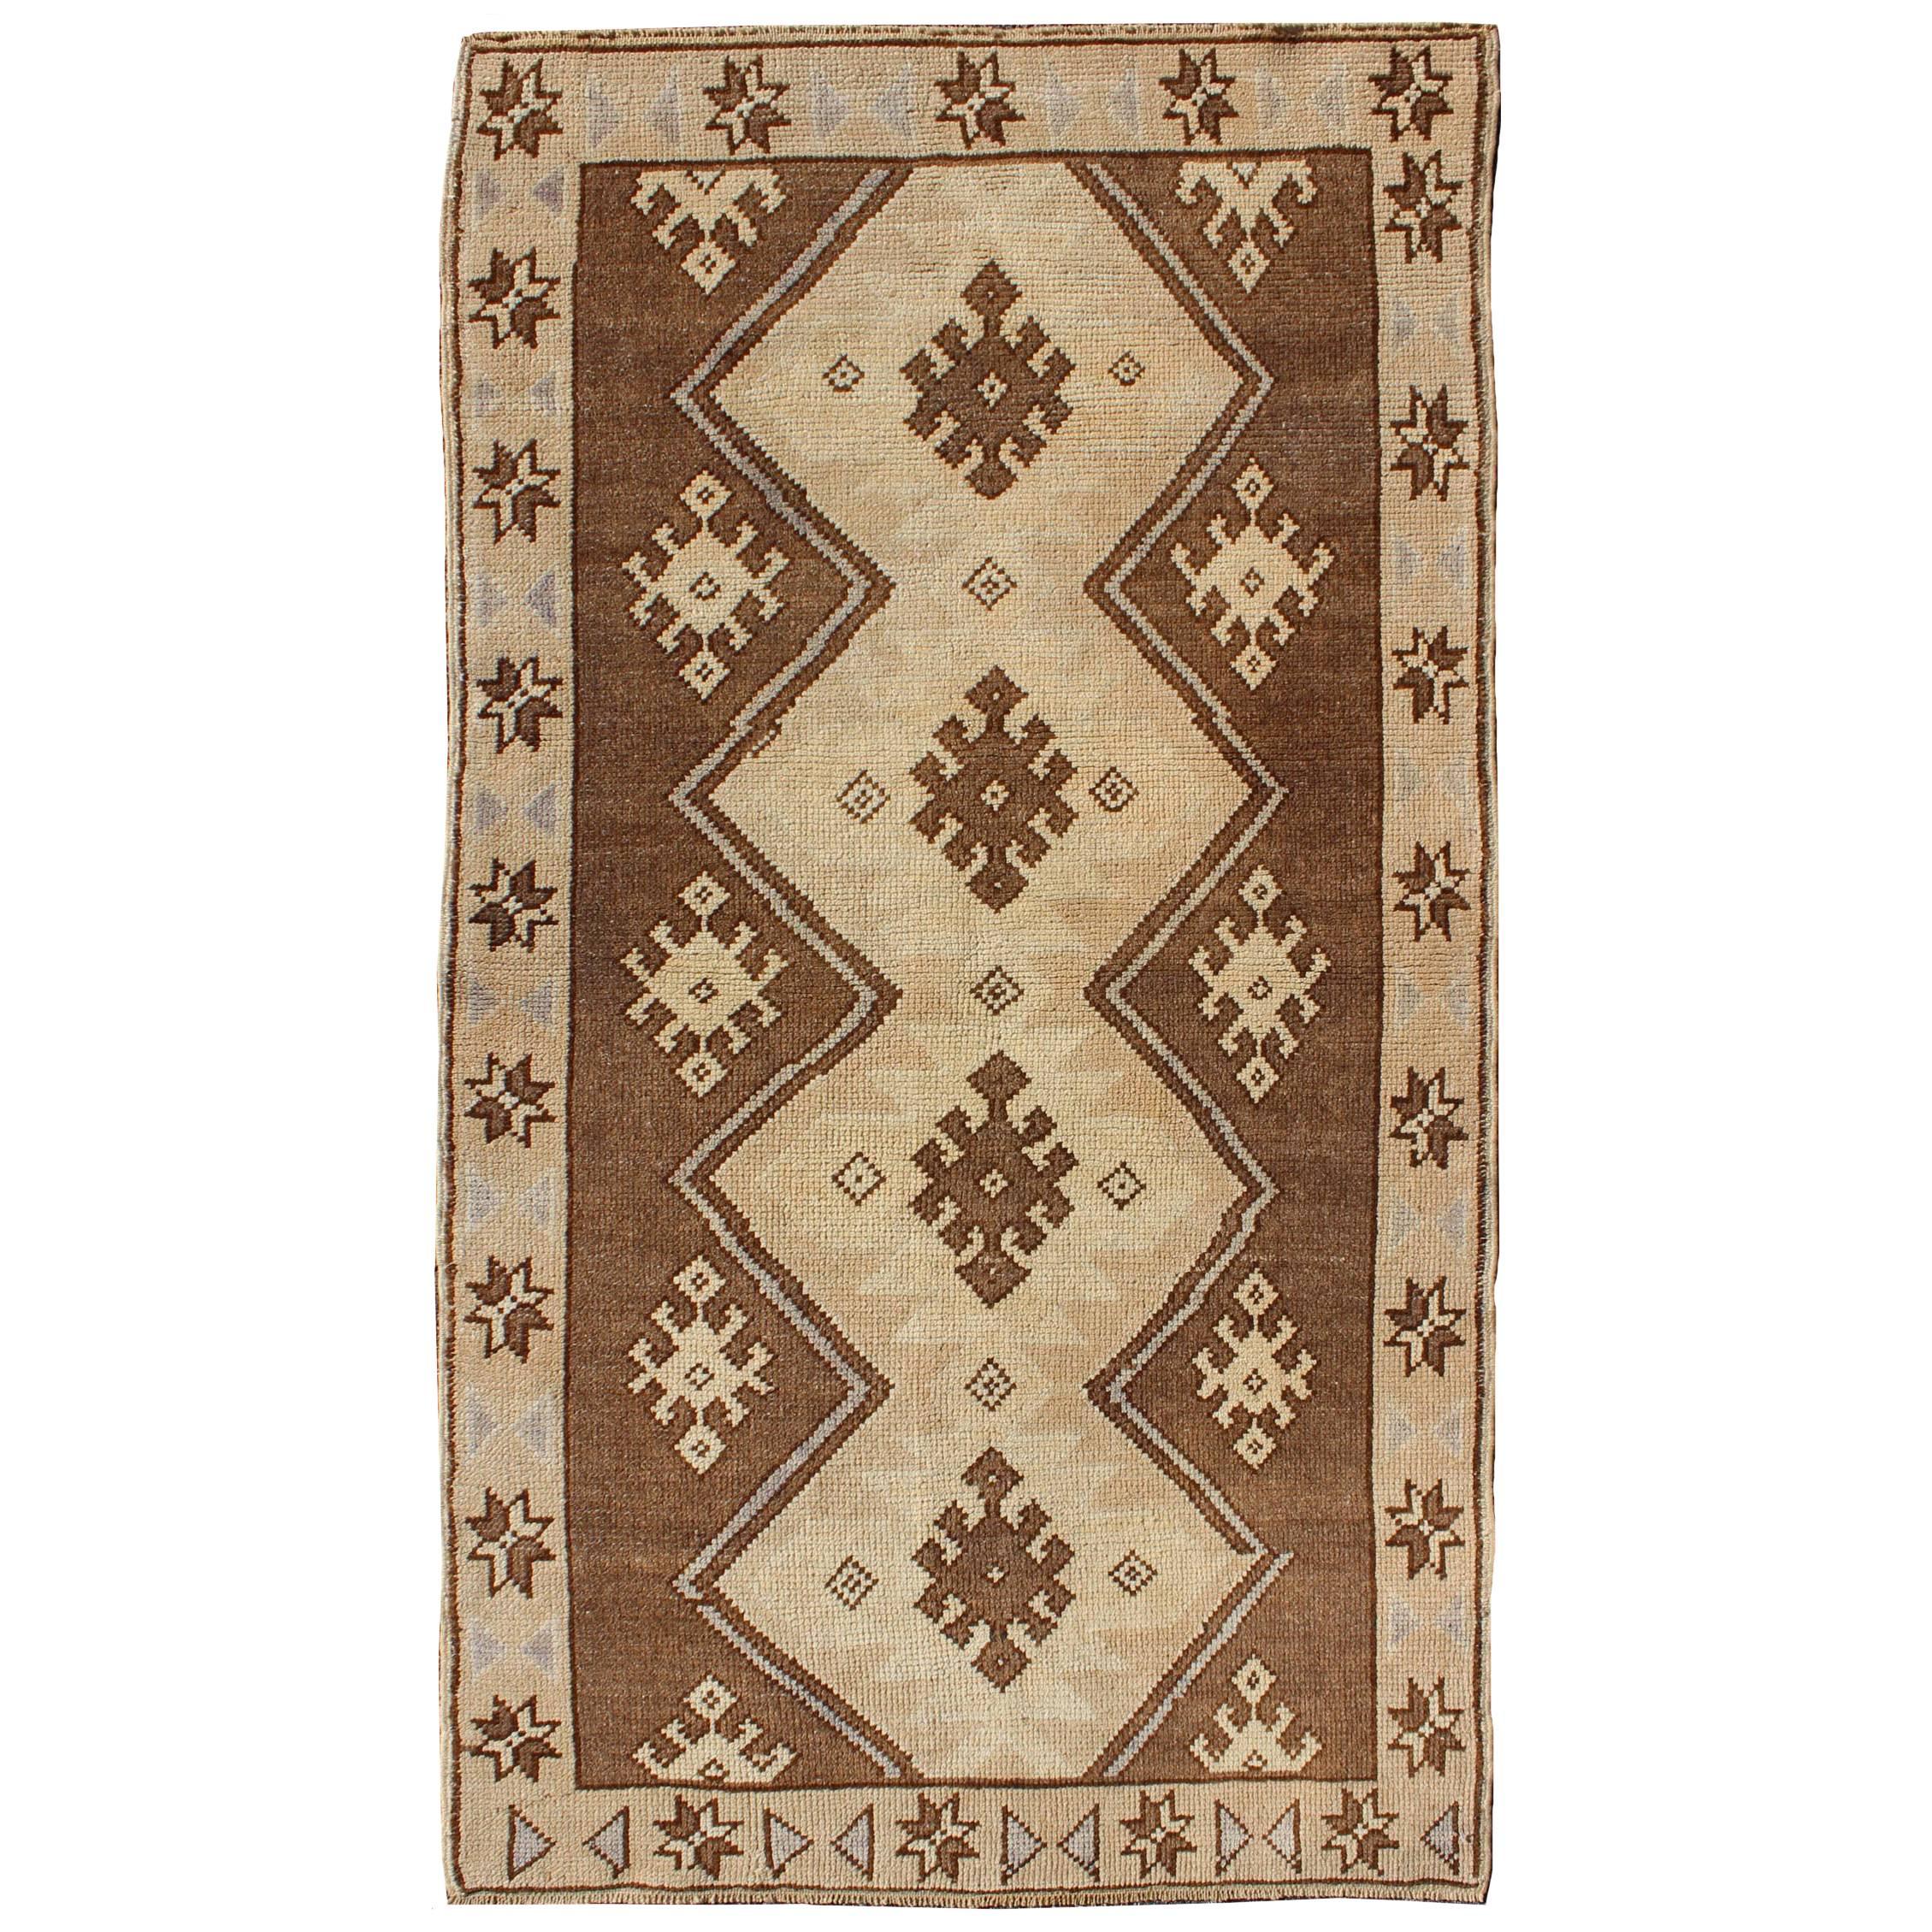  Vintage Turkish Oushak Rug with Vertical Diamond Medallions in Brown and Cream